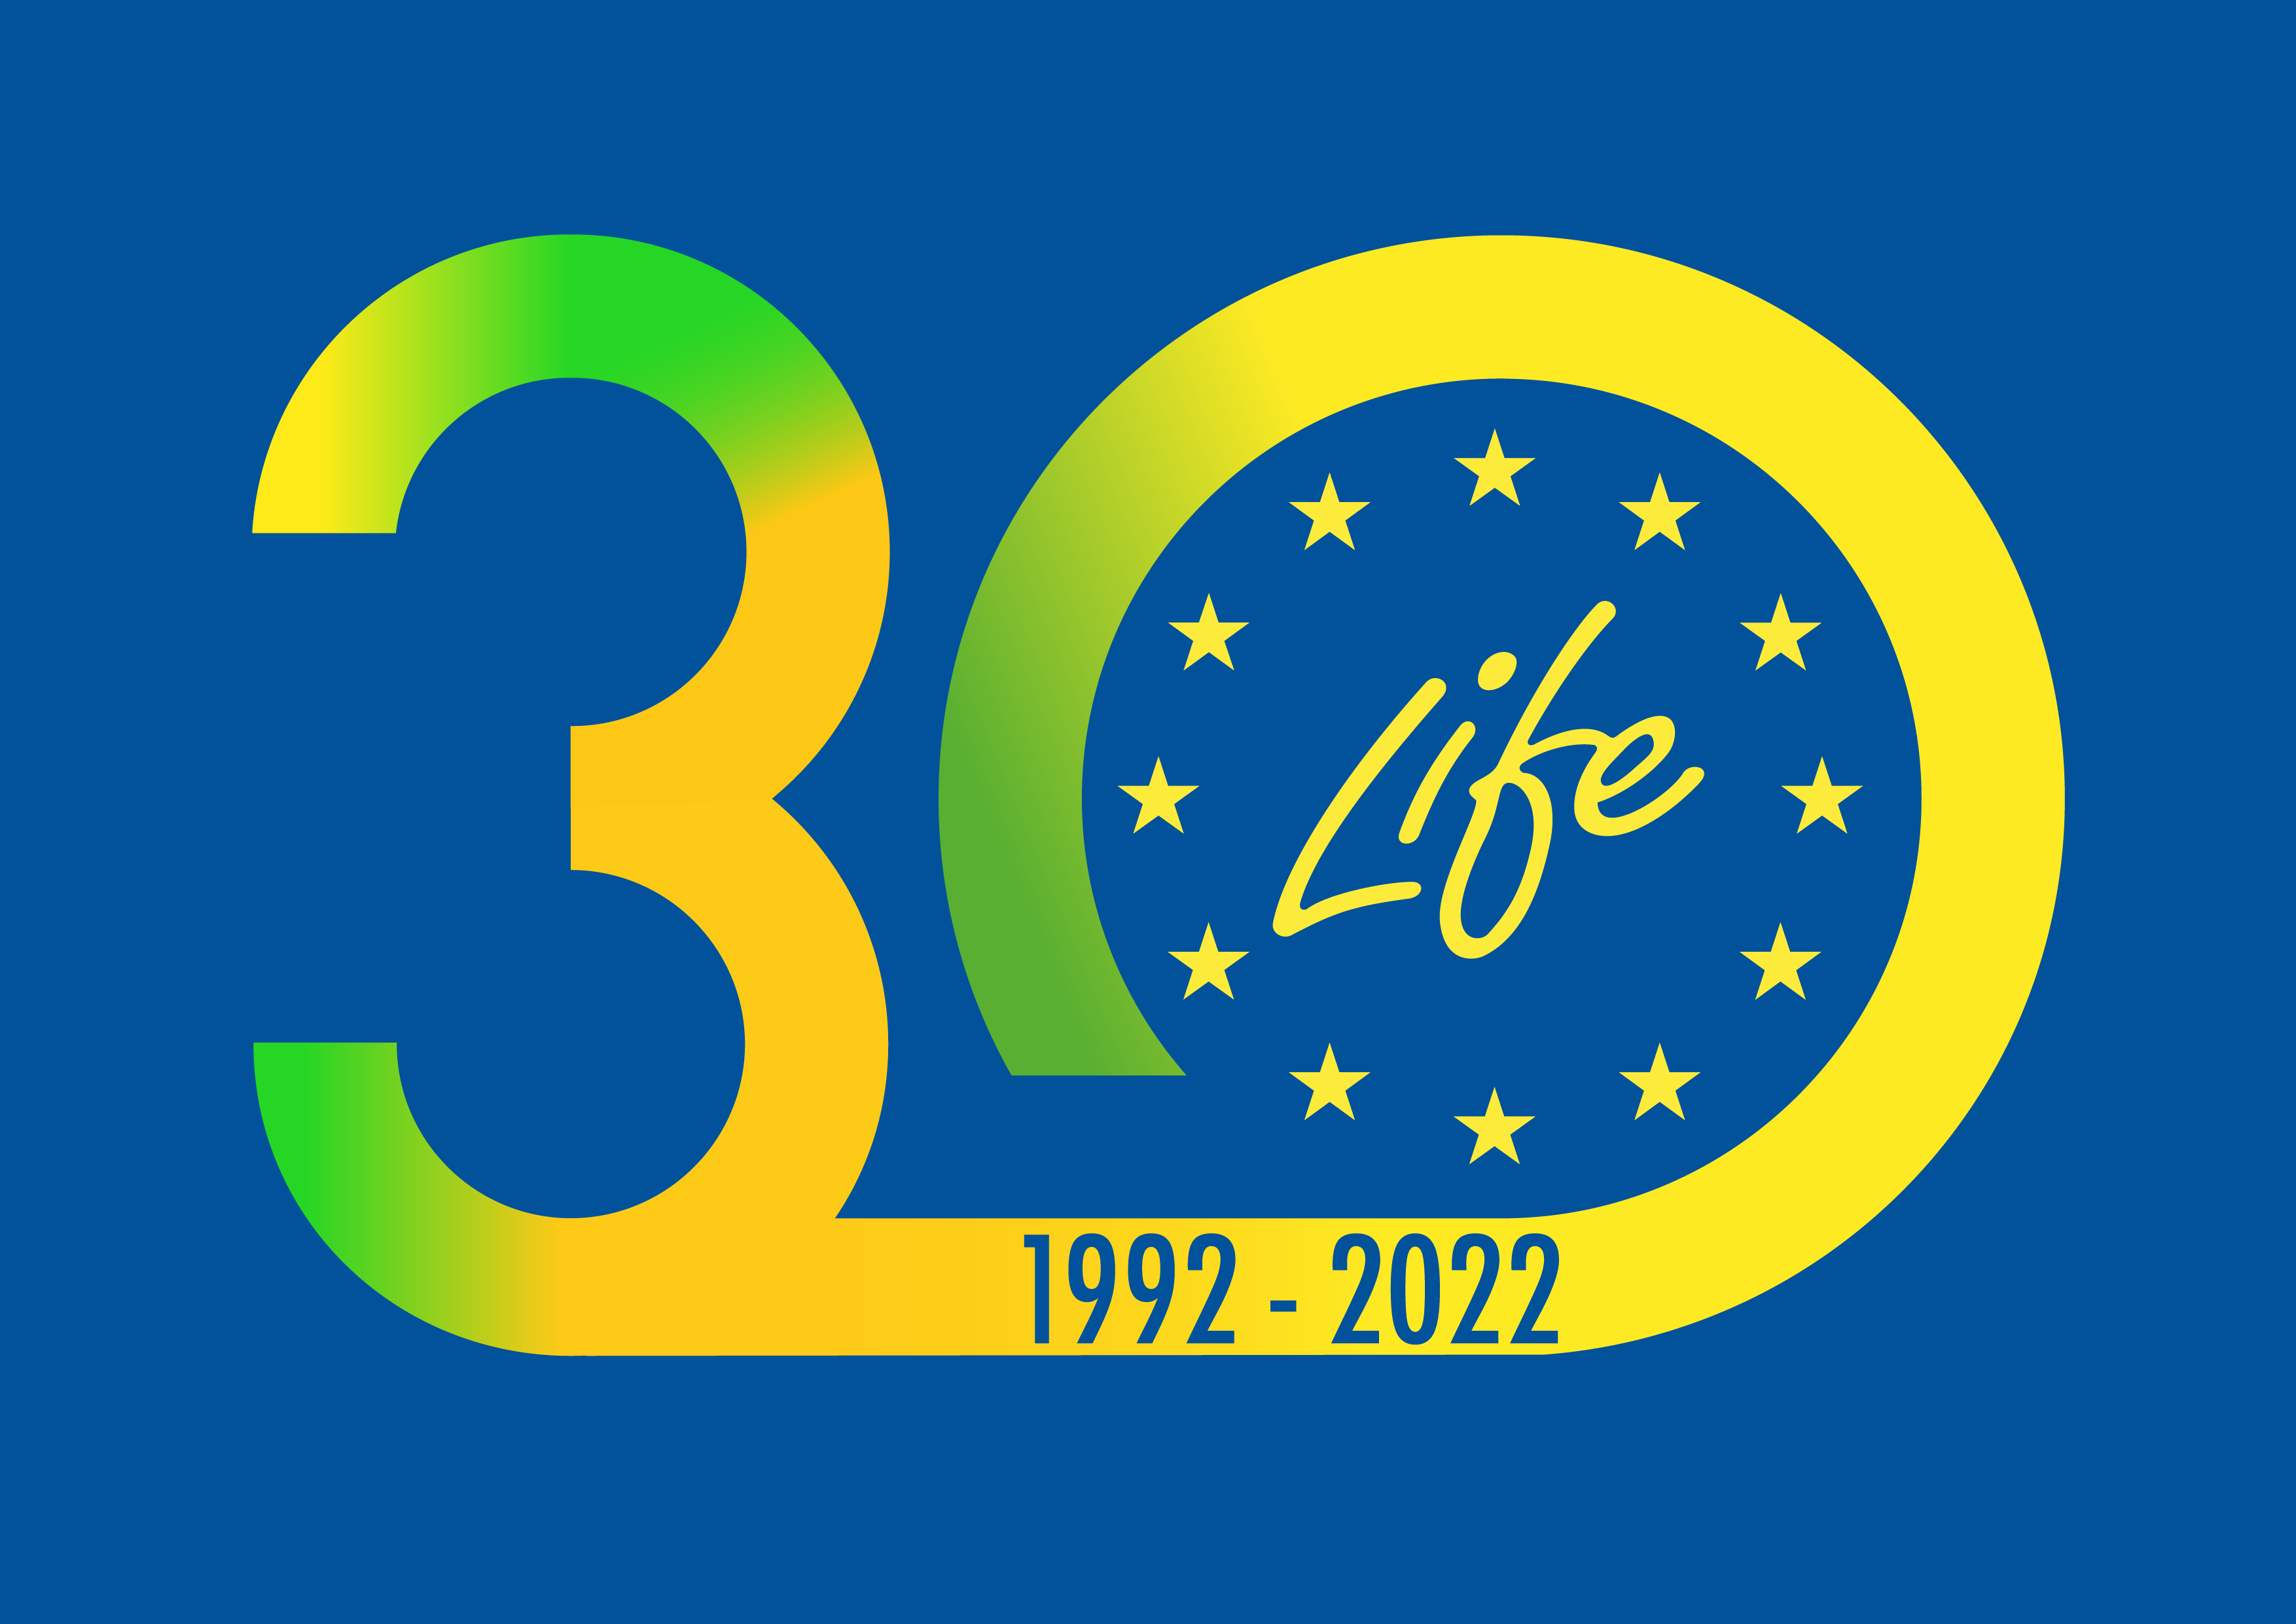 Anniversary event celebrating 30 years of the european programme LIFE, 26/5/2022